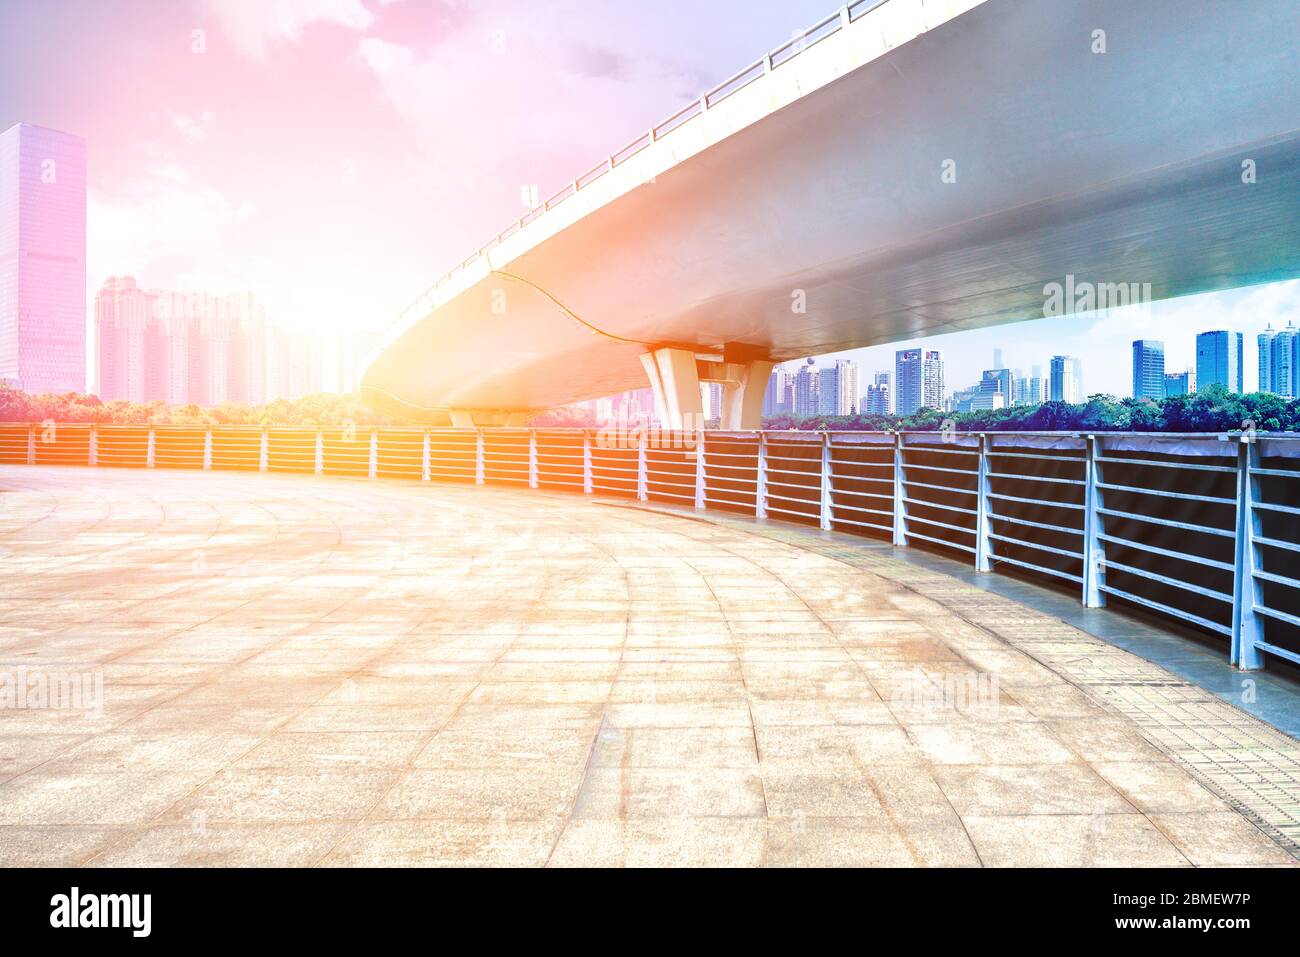 Under the overpass, car-free asphalt roads, modern city buildings as the background. Stock Photo